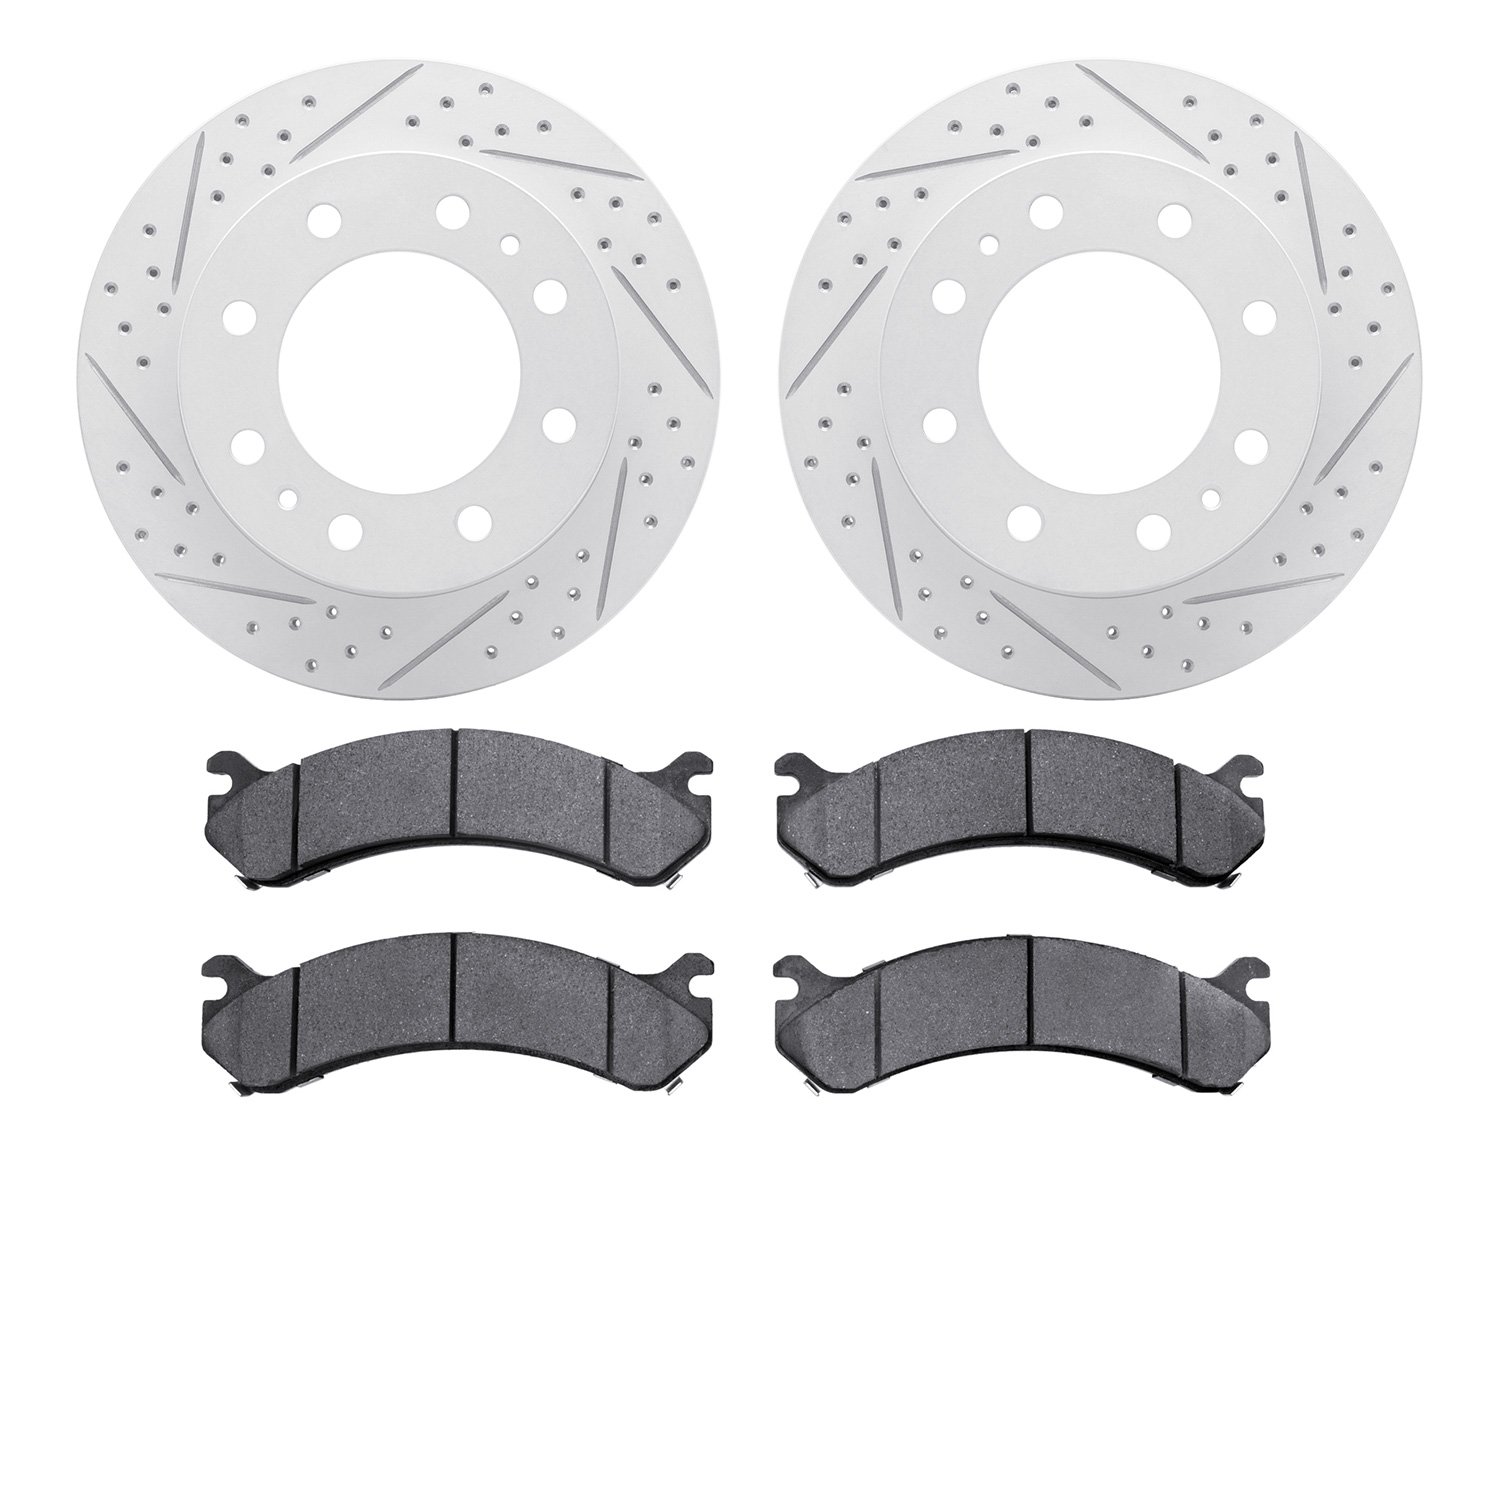 2502-48032 Geoperformance Drilled/Slotted Rotors w/5000 Advanced Brake Pads Kit, 2001-2017 GM, Position: Front